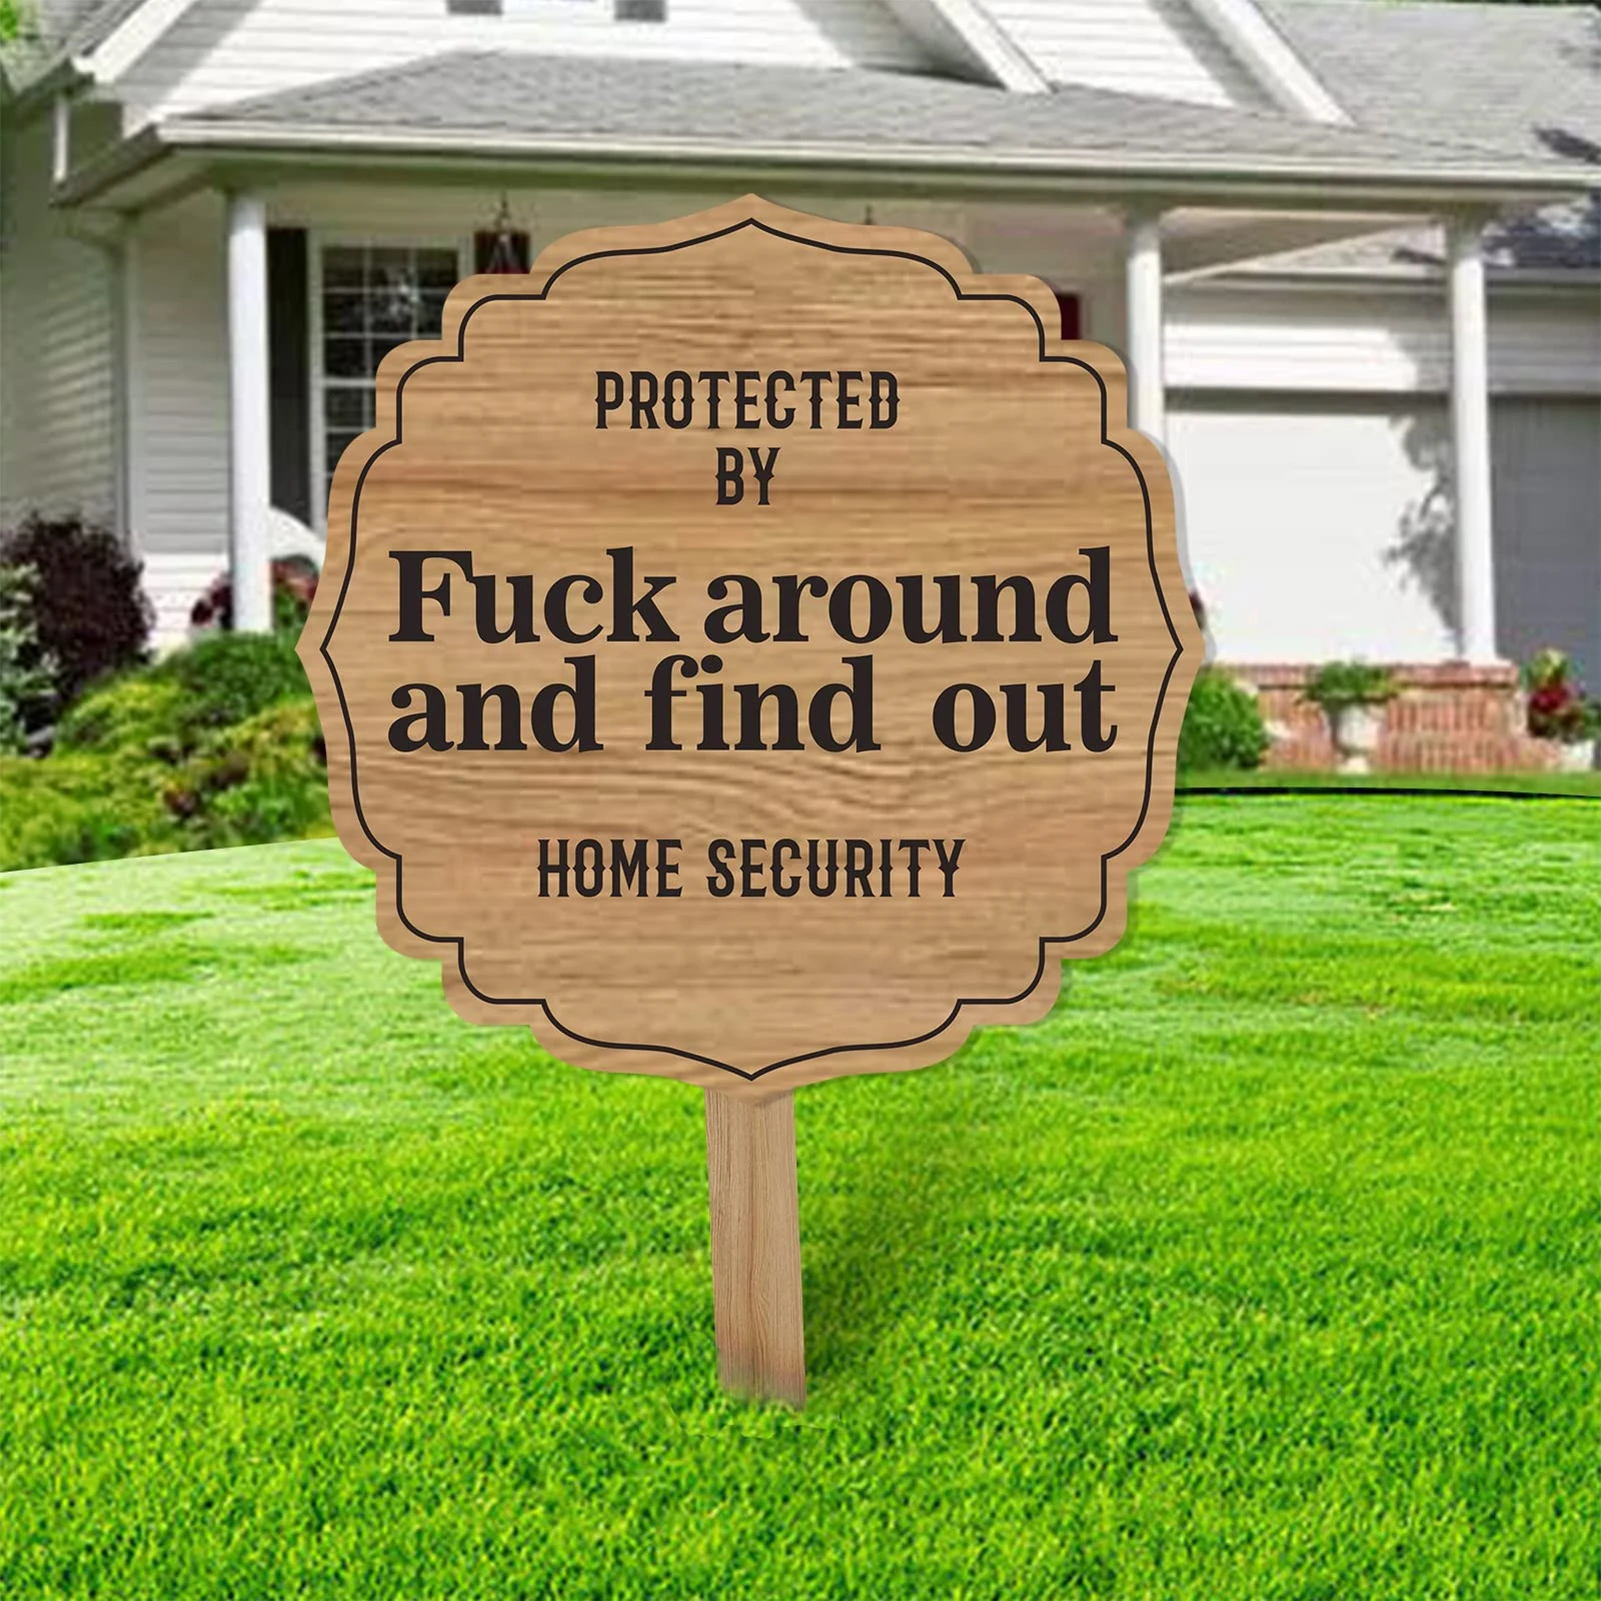 Garden Yard Sign Protected By Fxxx Around and Find OutSurvei